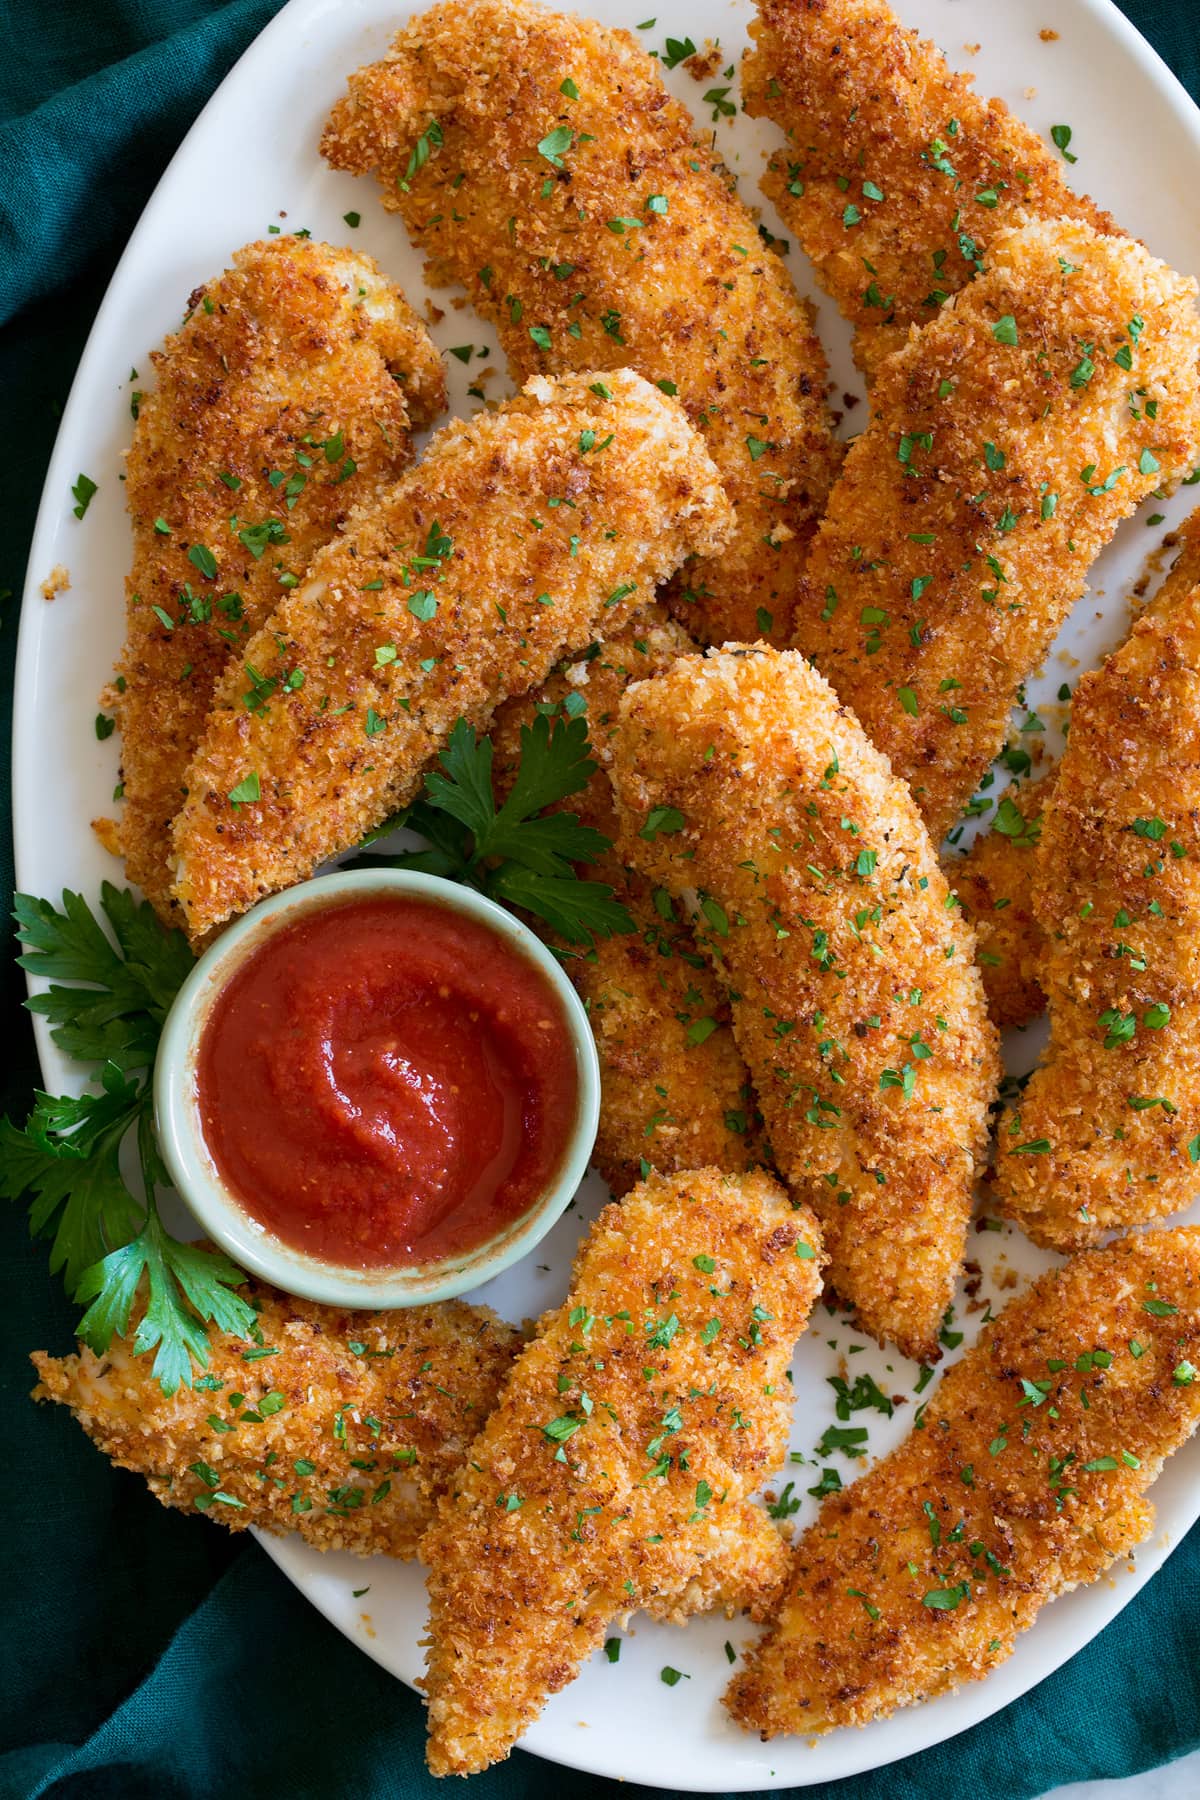 Baked chicken tenders served with marinara sauce.